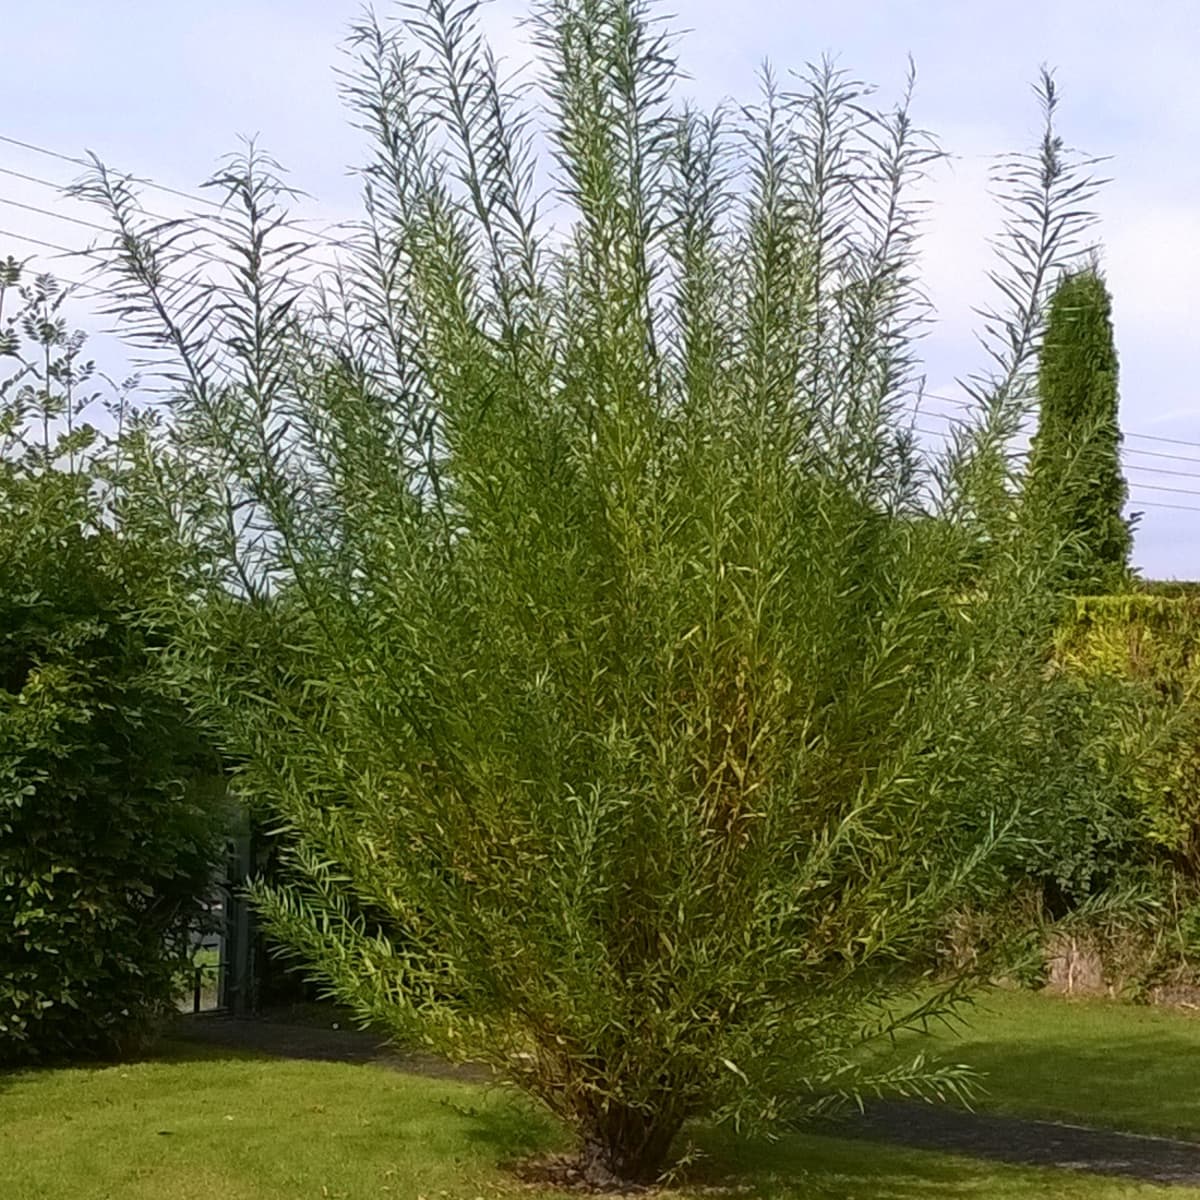 Willow 50 Super fast growing Willow Cuttings grow up to 3-4 meter a year easy to plant 